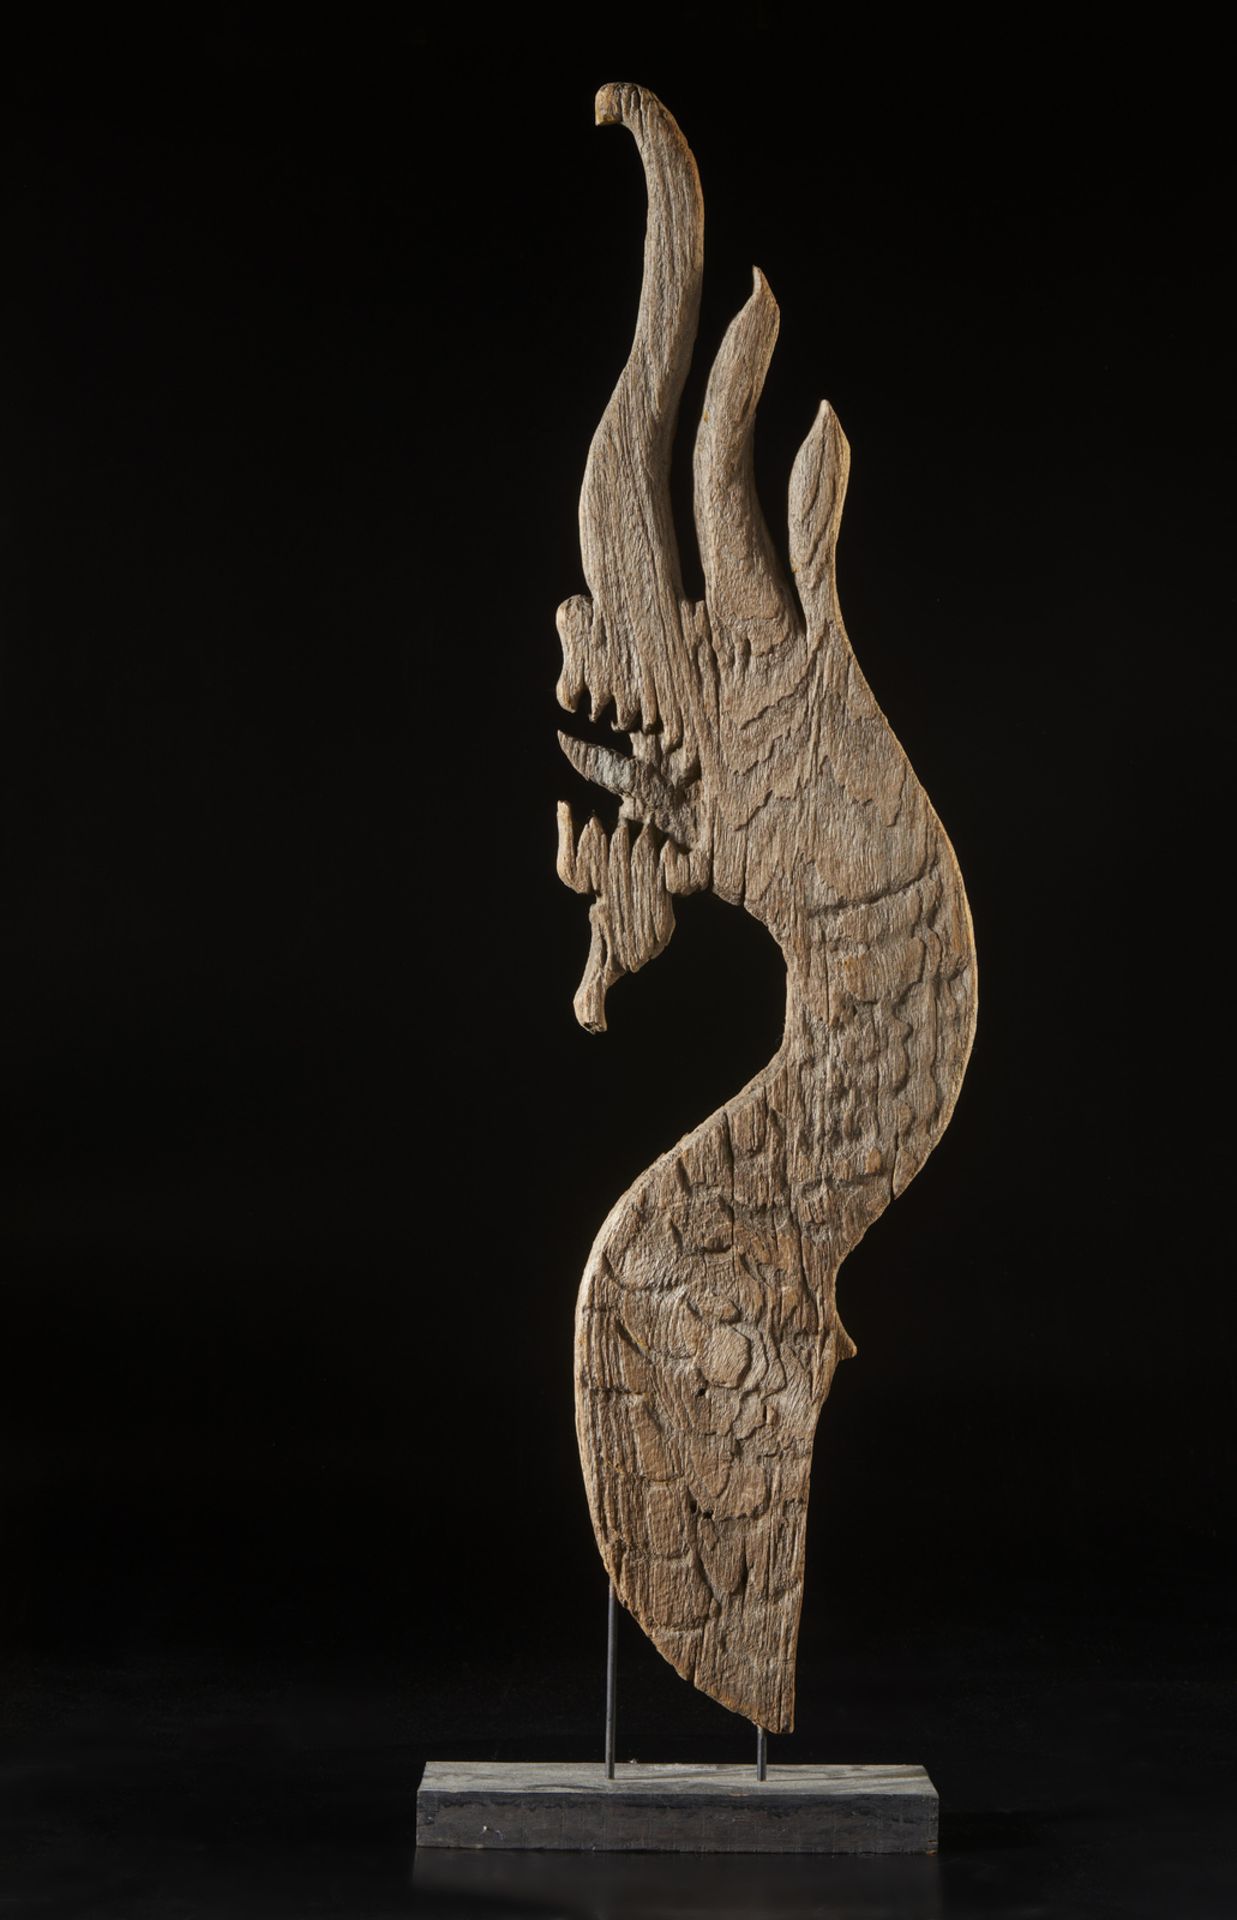 A wooden gable apex in the shape of a Naga snake Cambodia or Thailand, Khmer empire, 14th century